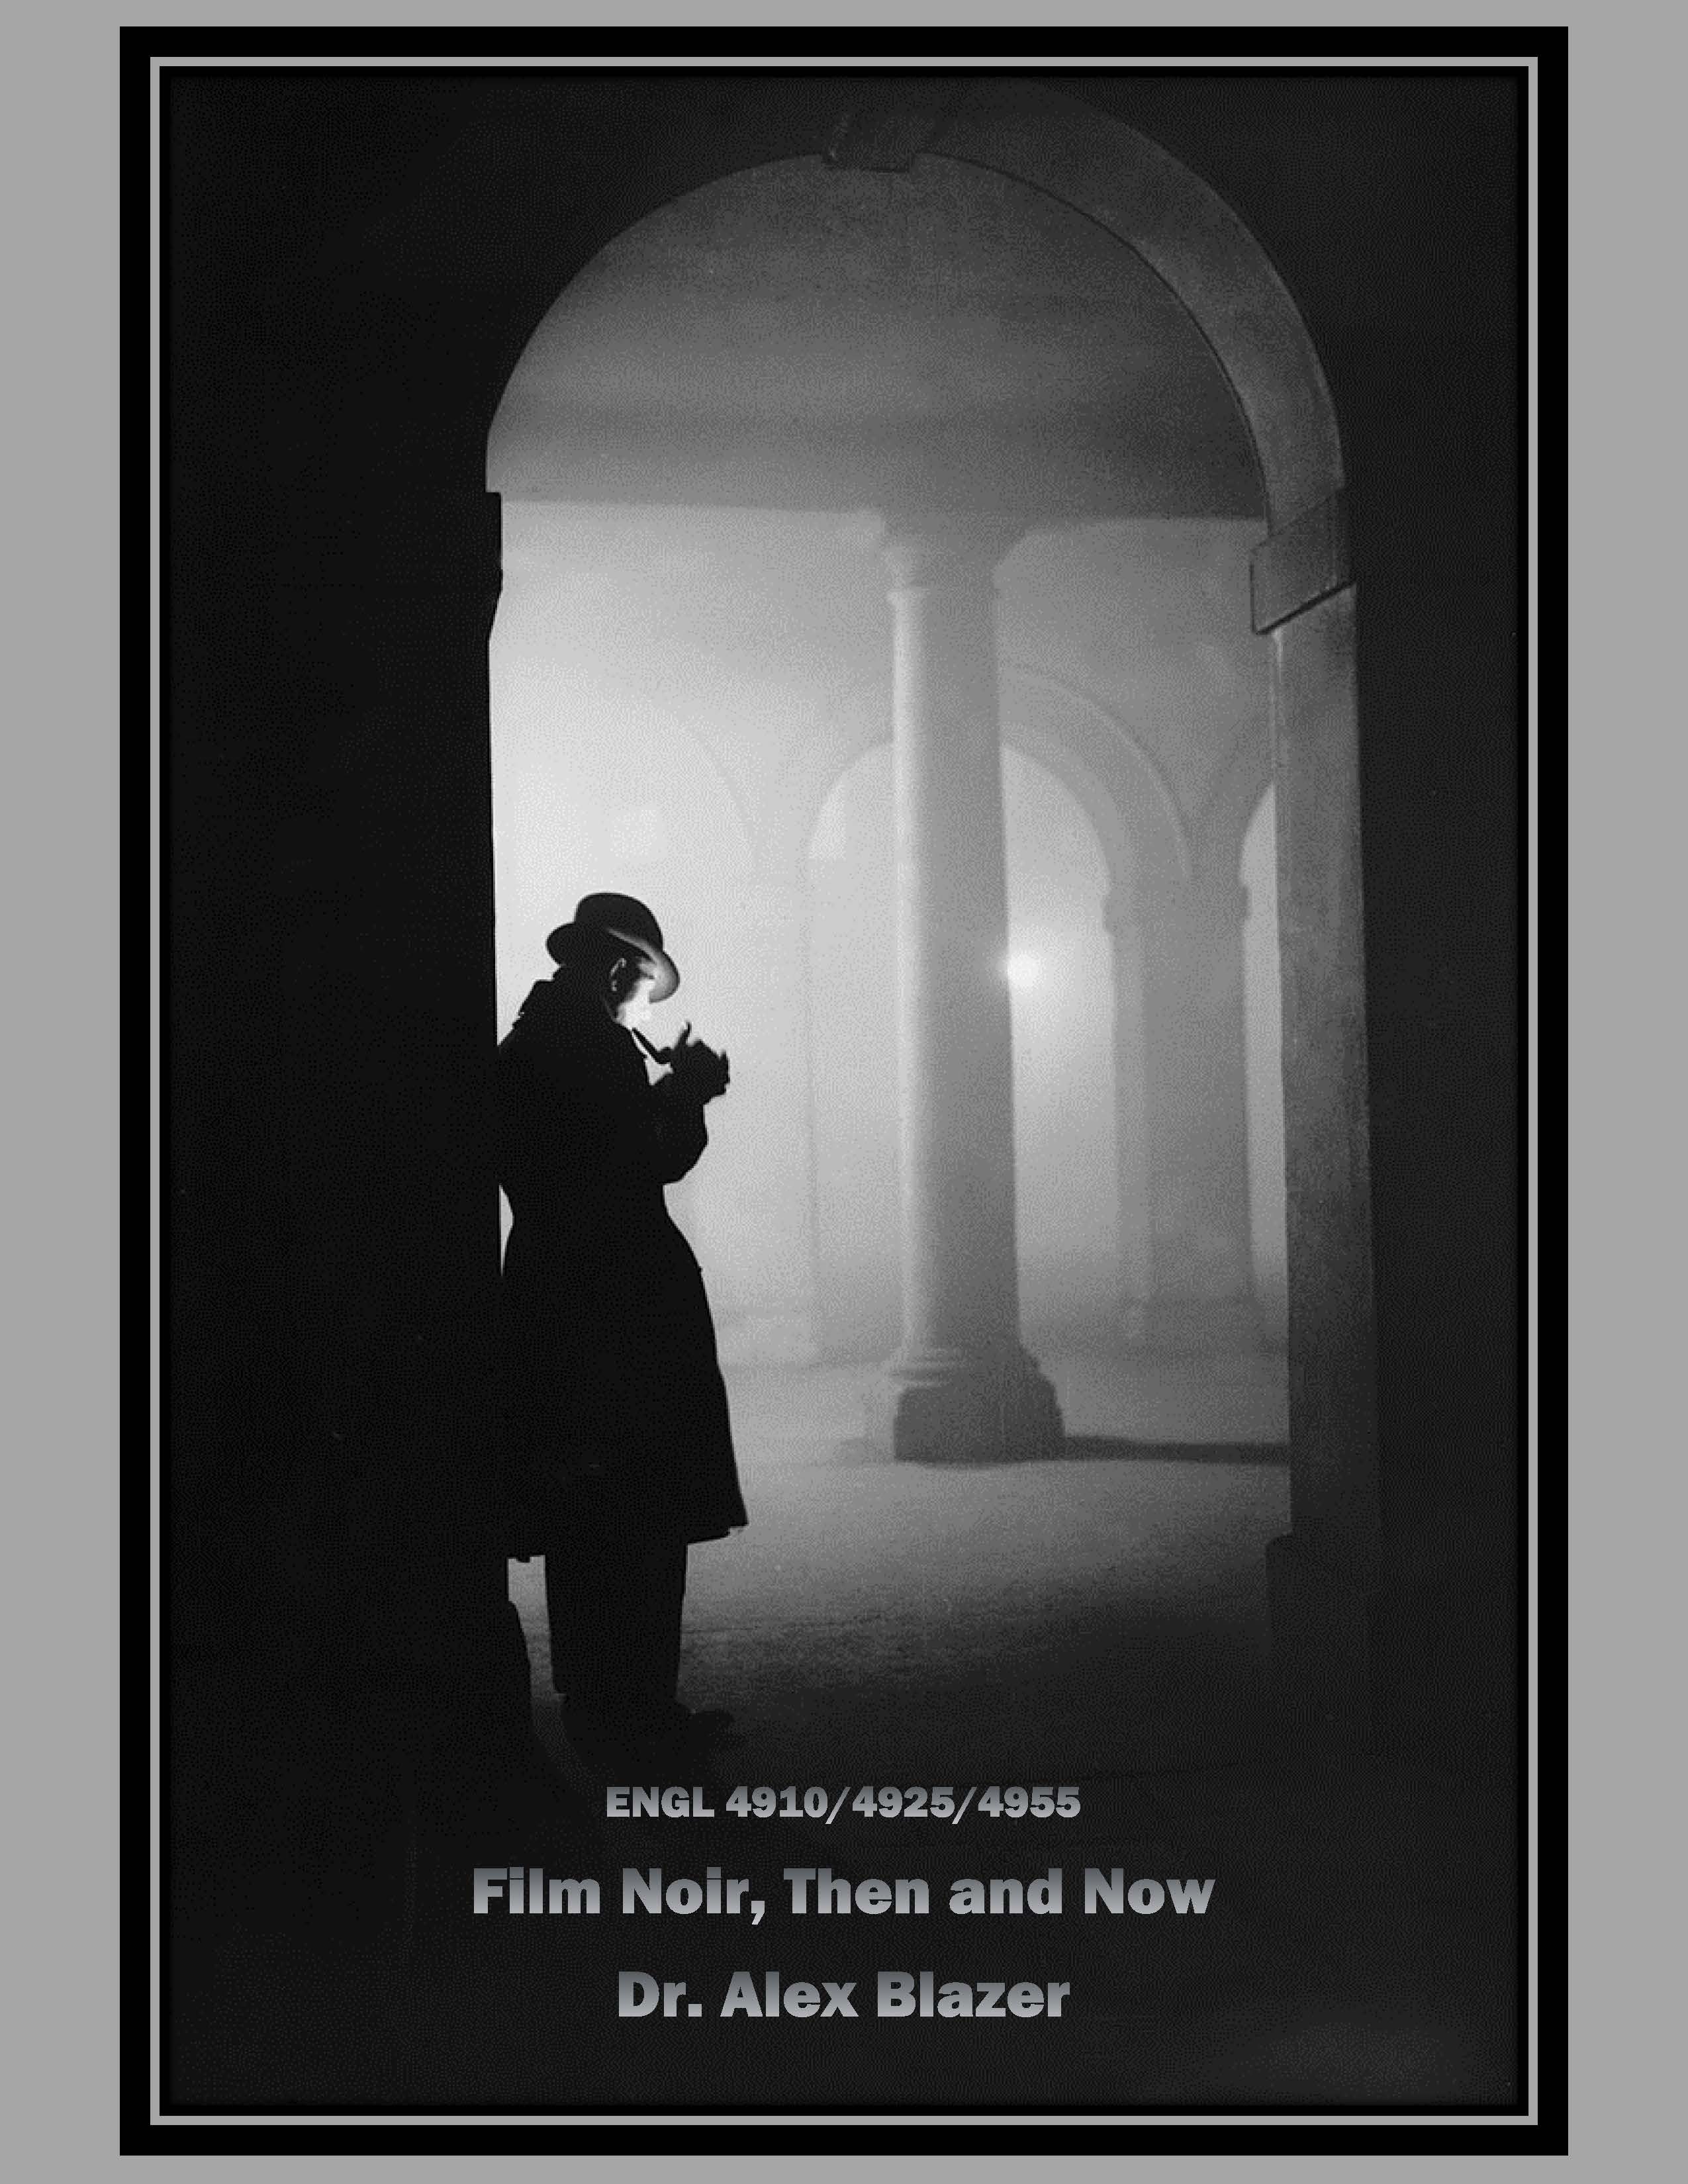 ENGL 4910 Film Noir, Then and Now